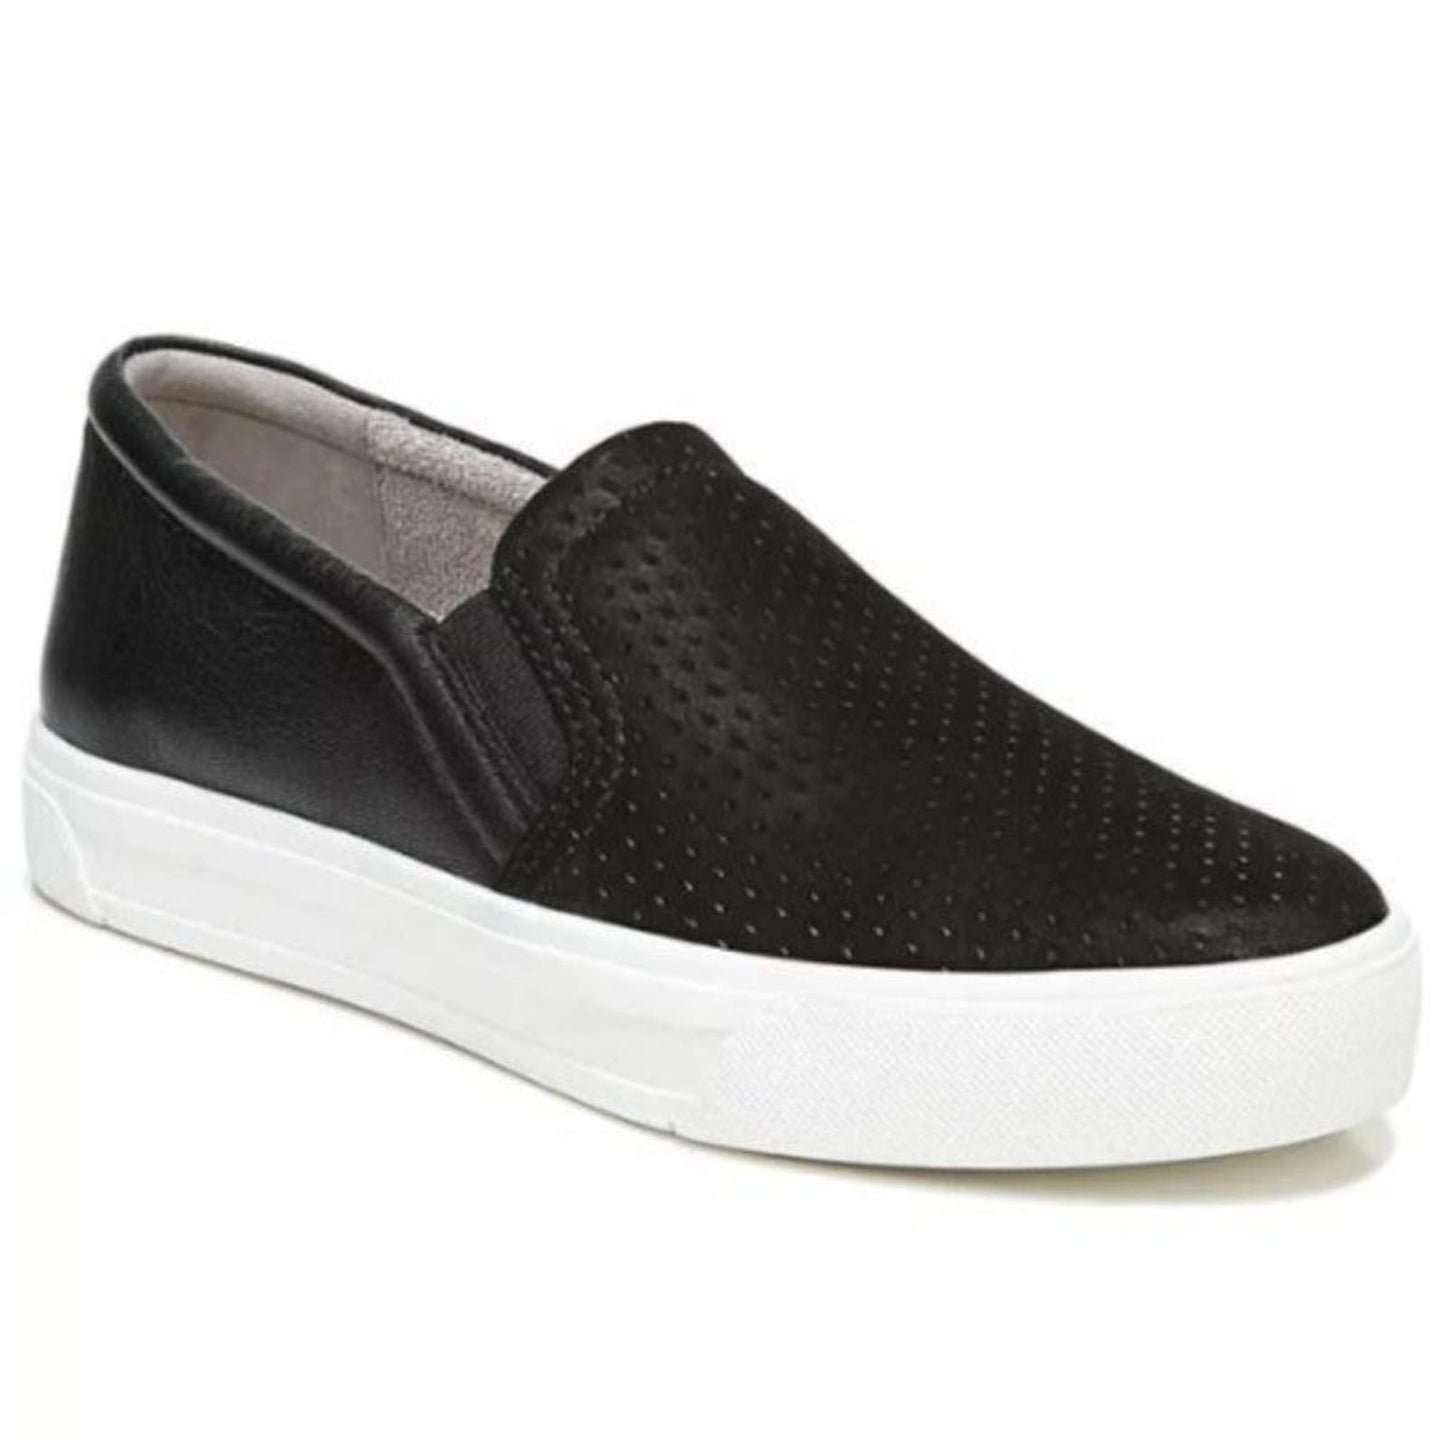 Naturalizer Aileen Slip-on Sneakers in Black New Size 6